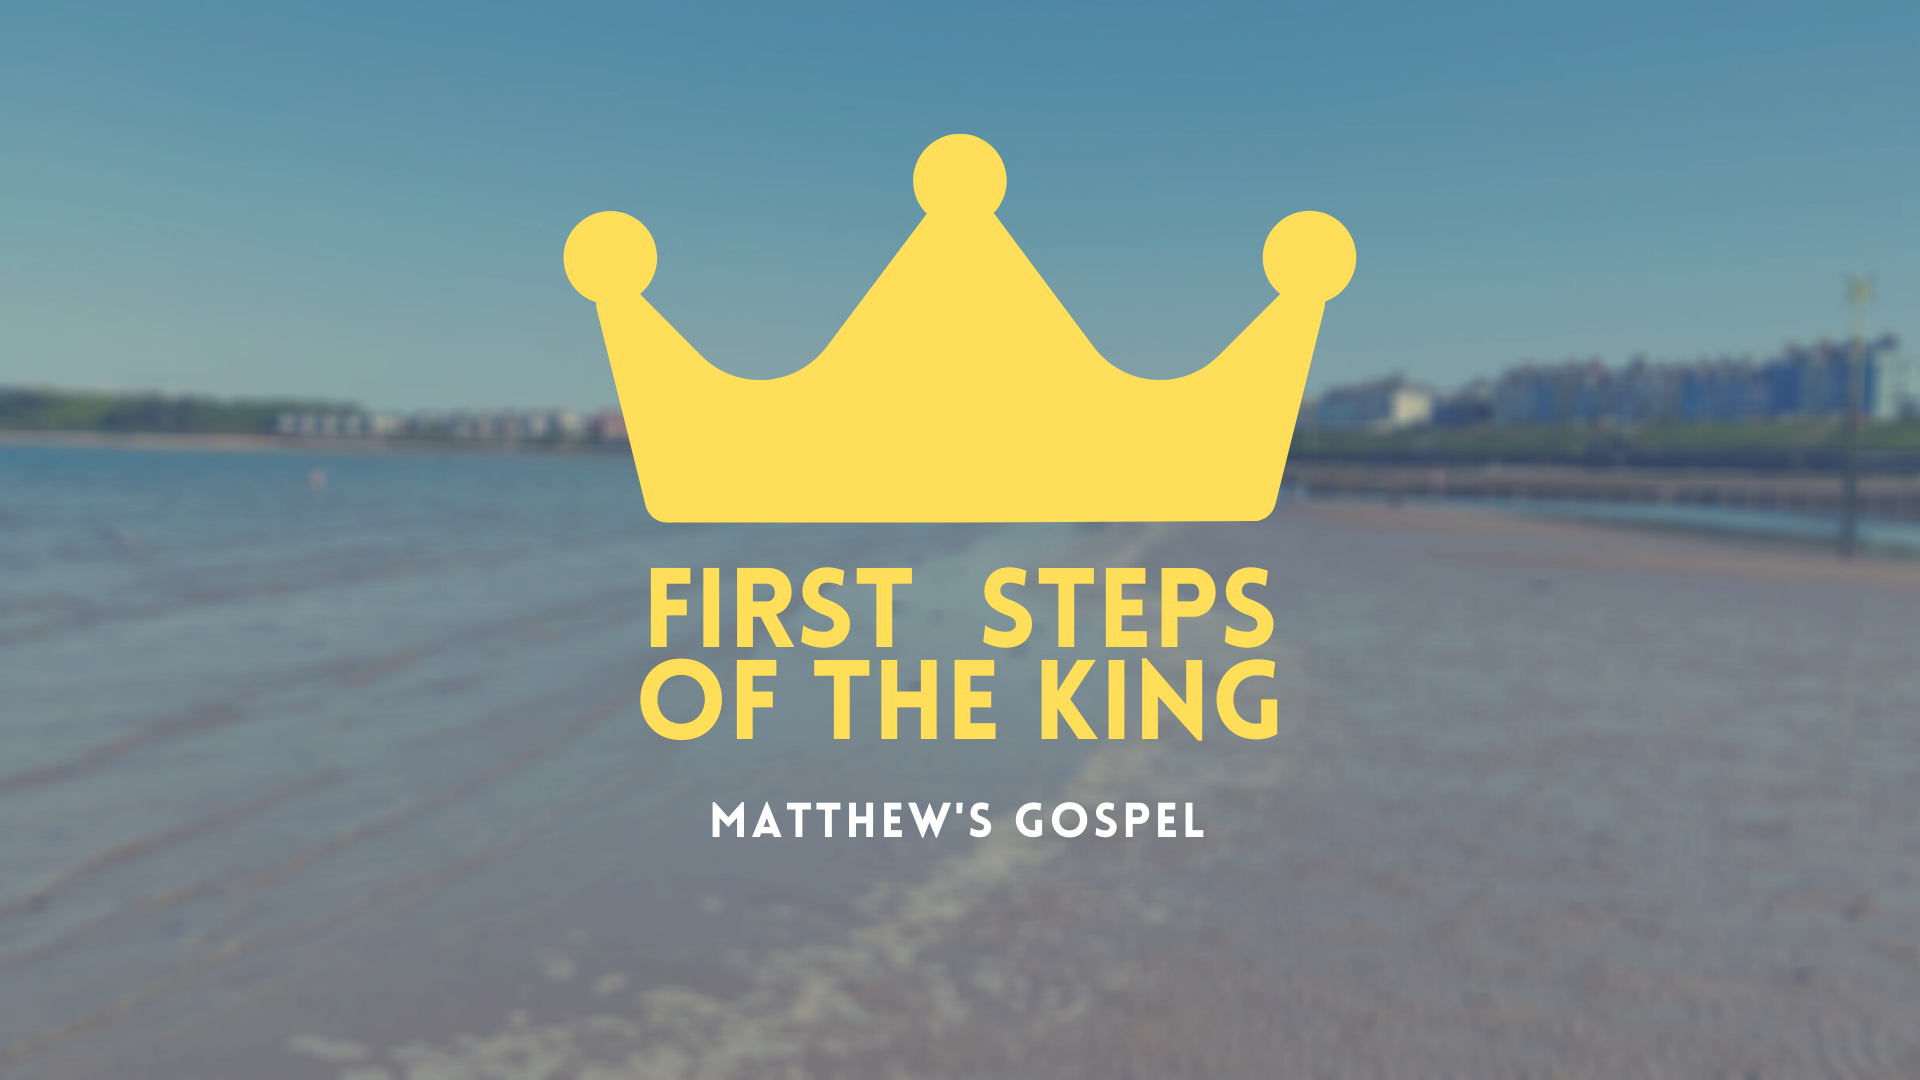 The First Steps of the King